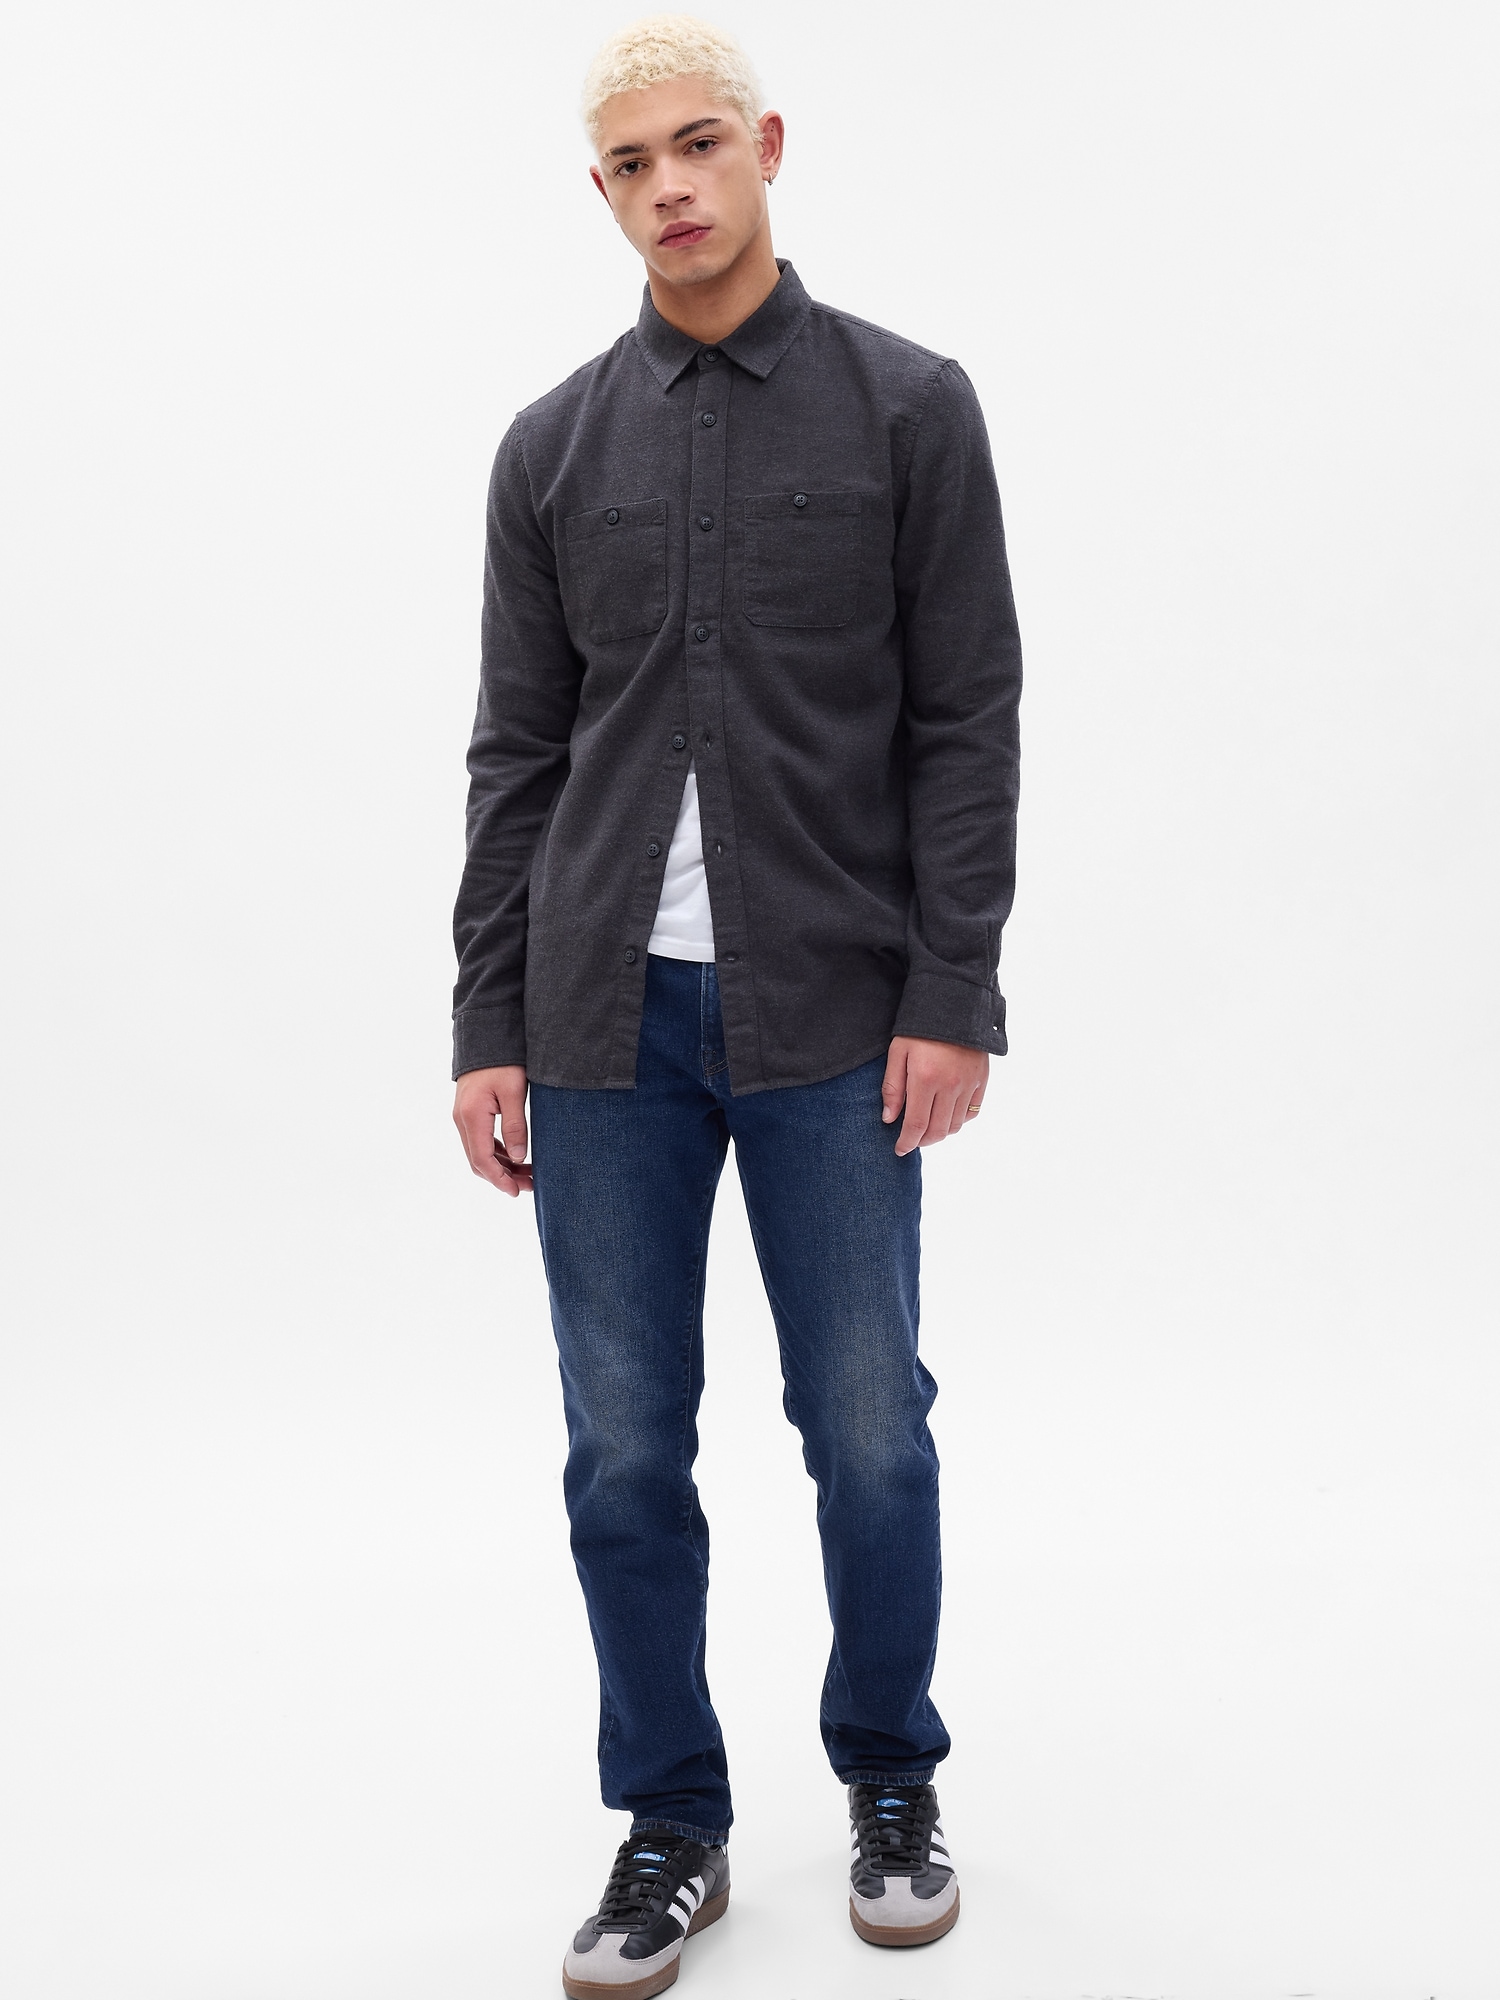 Athletic Slim Jeans in GapFlex with Washwell